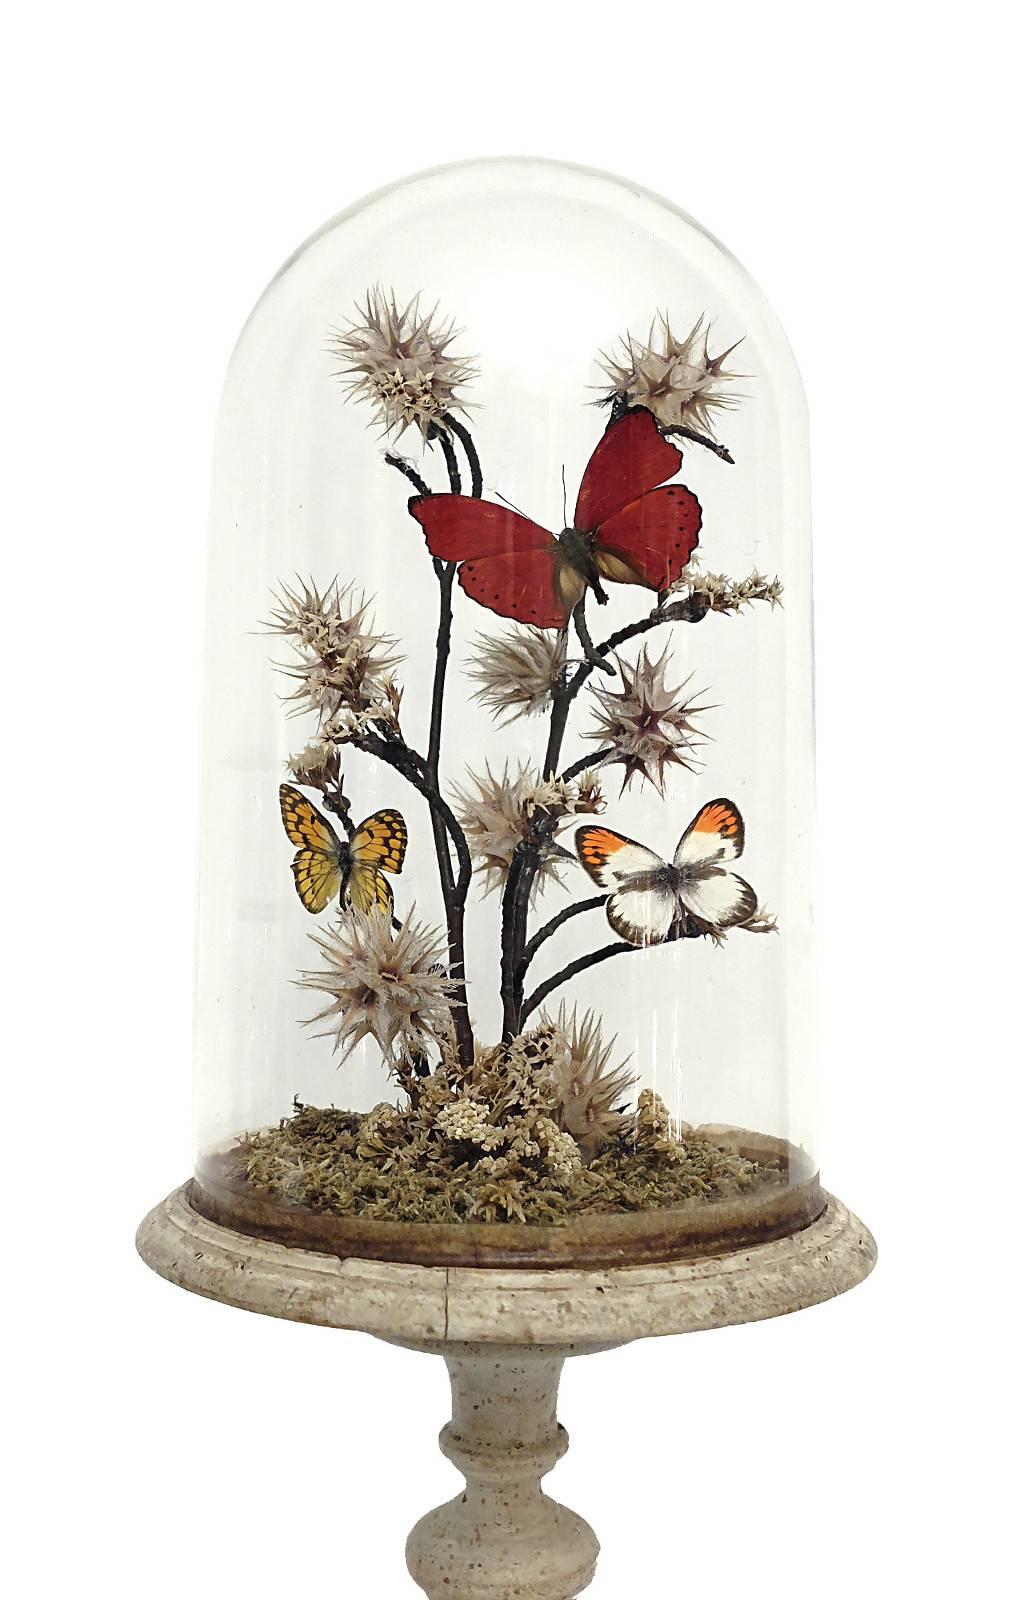 A Diorama with natural Wunderkammer Specimens of butterflies leaned over flowering tree branches willing over moss. The Specimens are mounted inside a little glass dome over a lite blue painted wooden base.